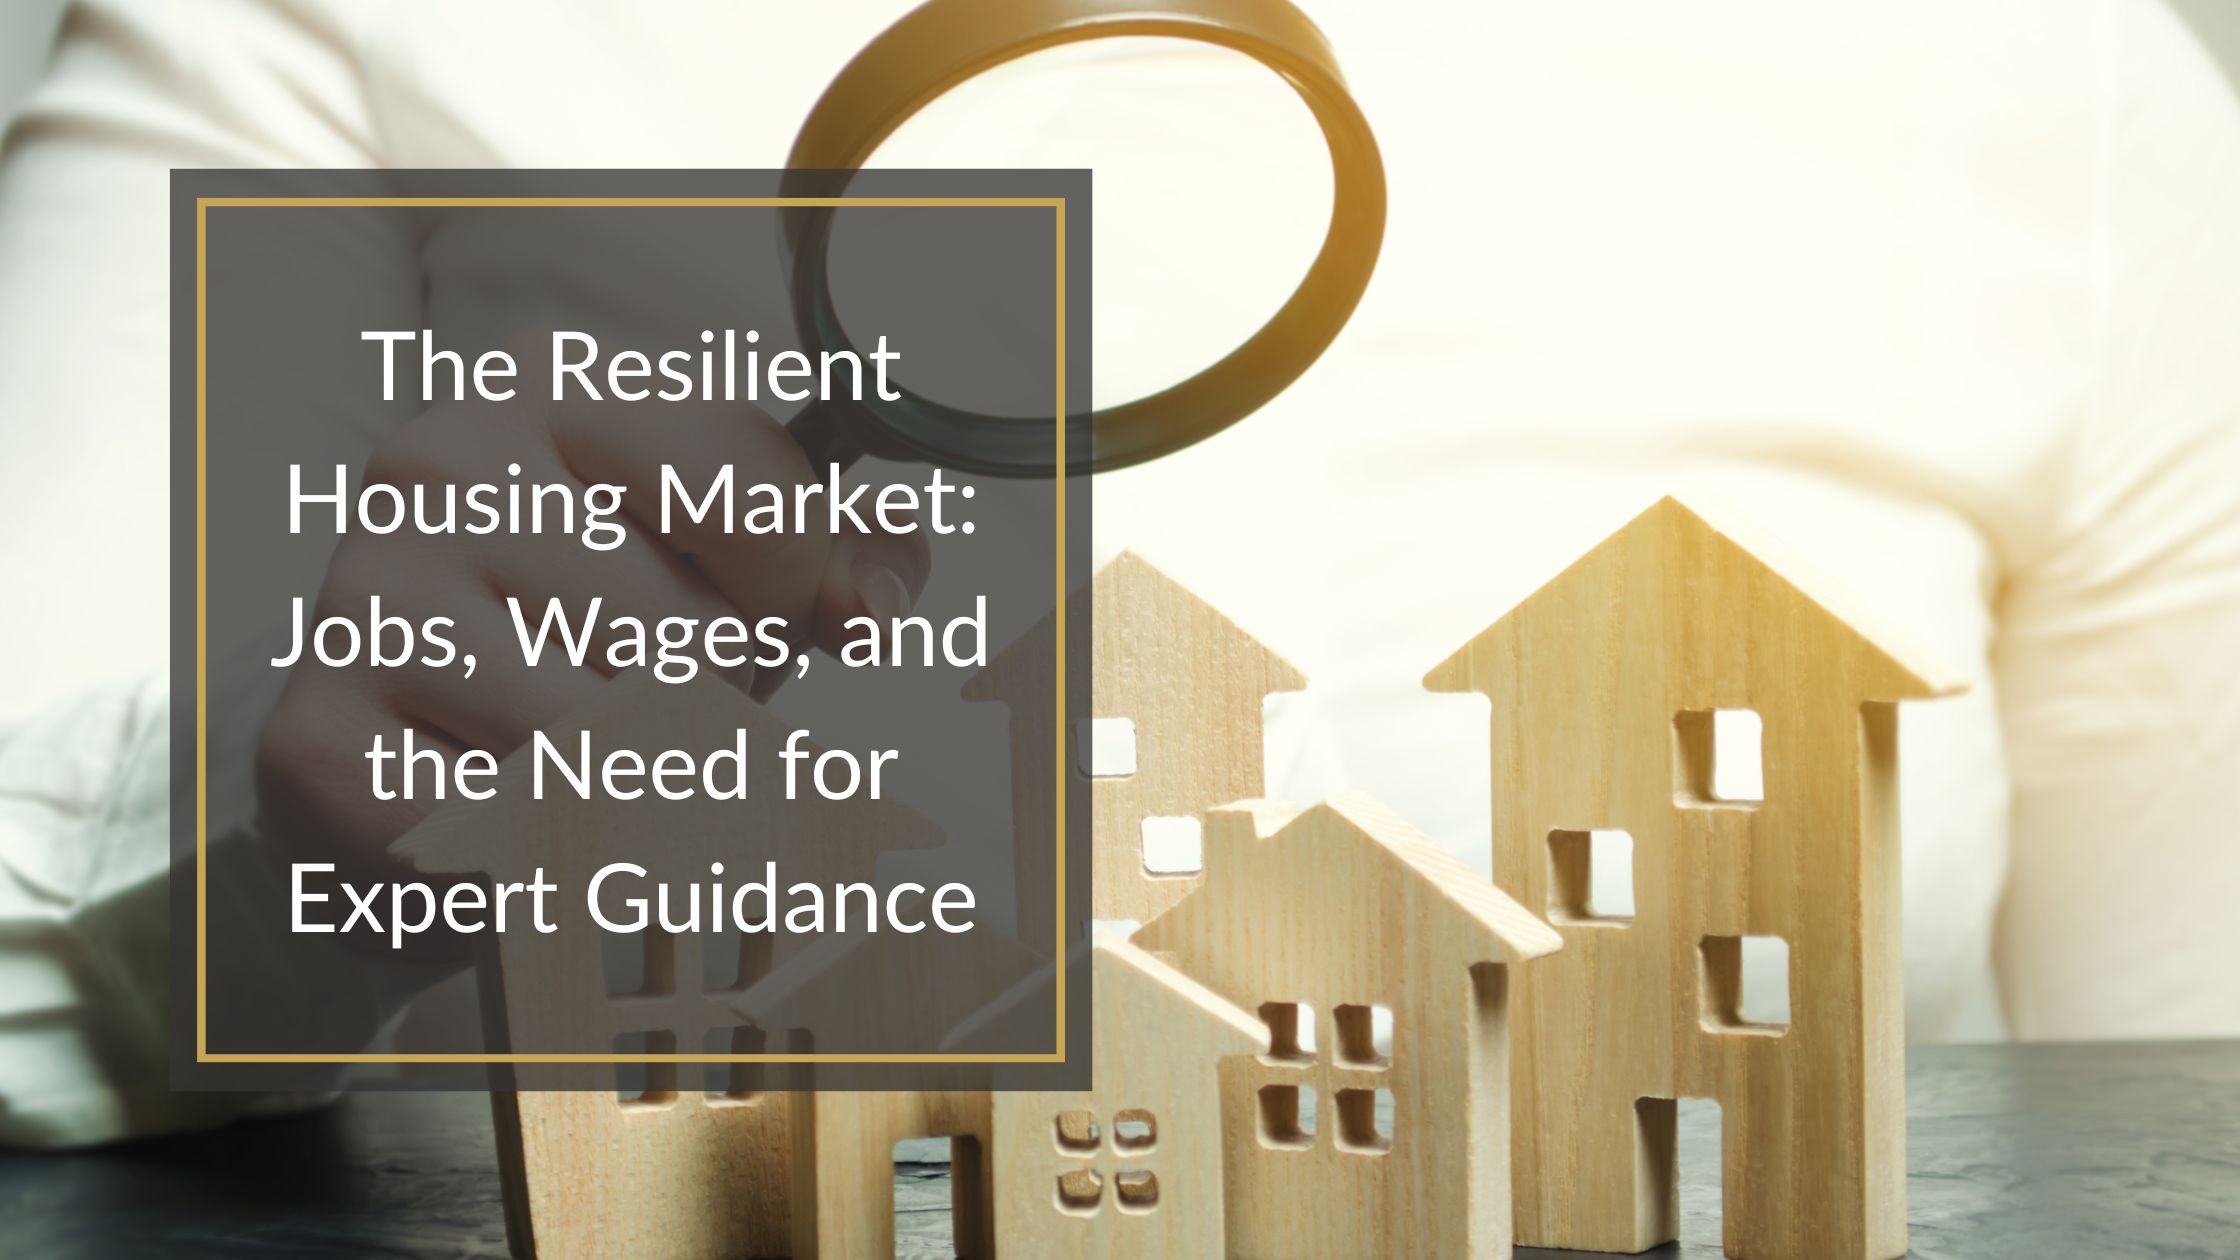 The Resilient Housing Market